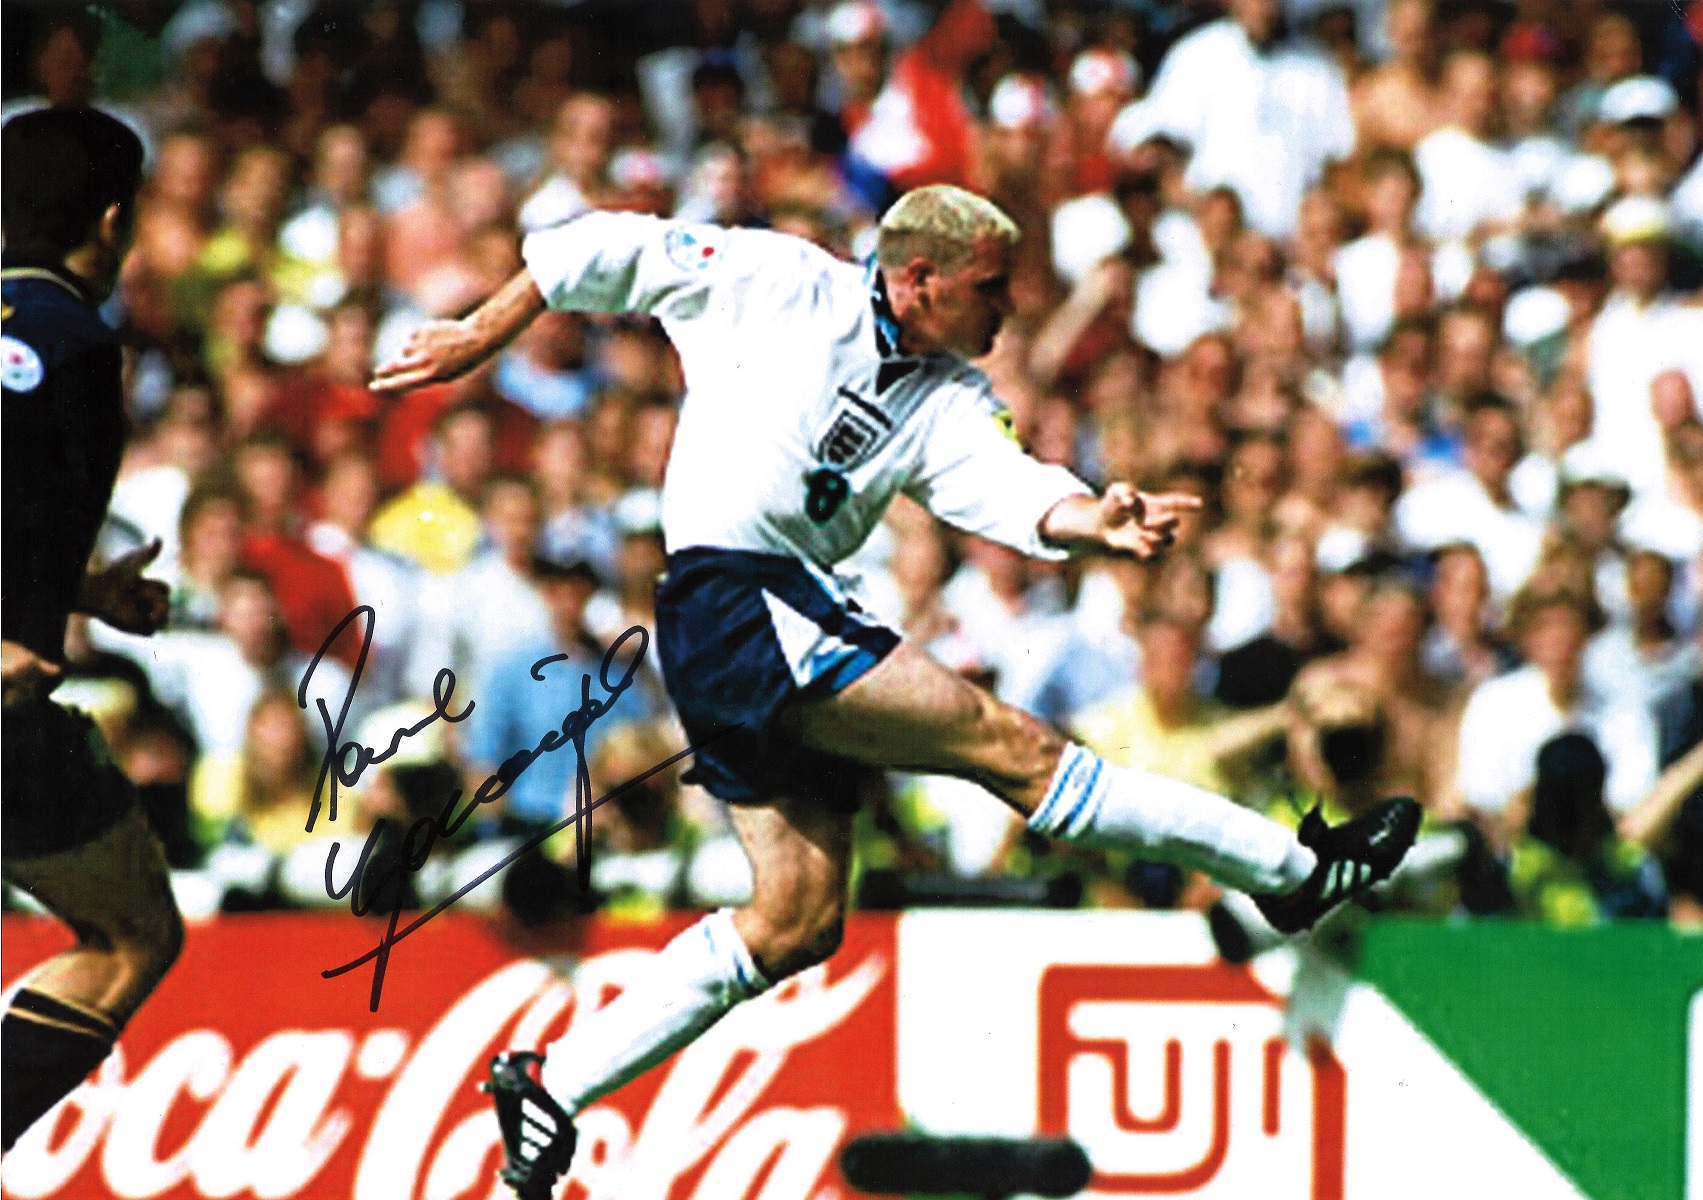 Football Paul Gascoigne 12x18 signed colour photo pictured scoring his iconic goal against